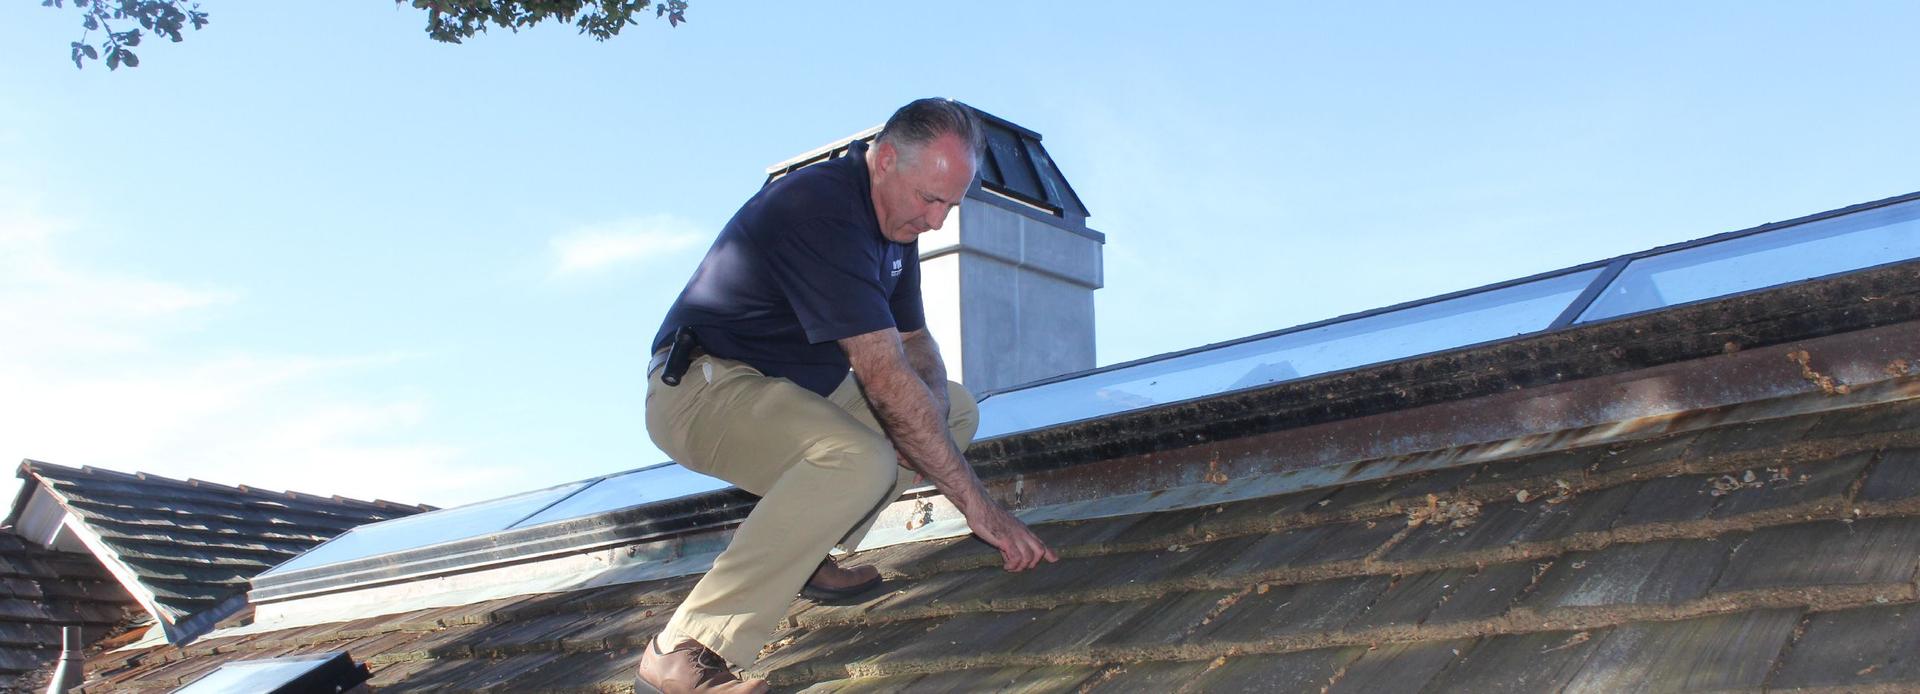 WIN Home Inspector doing asbestos test on the house roof